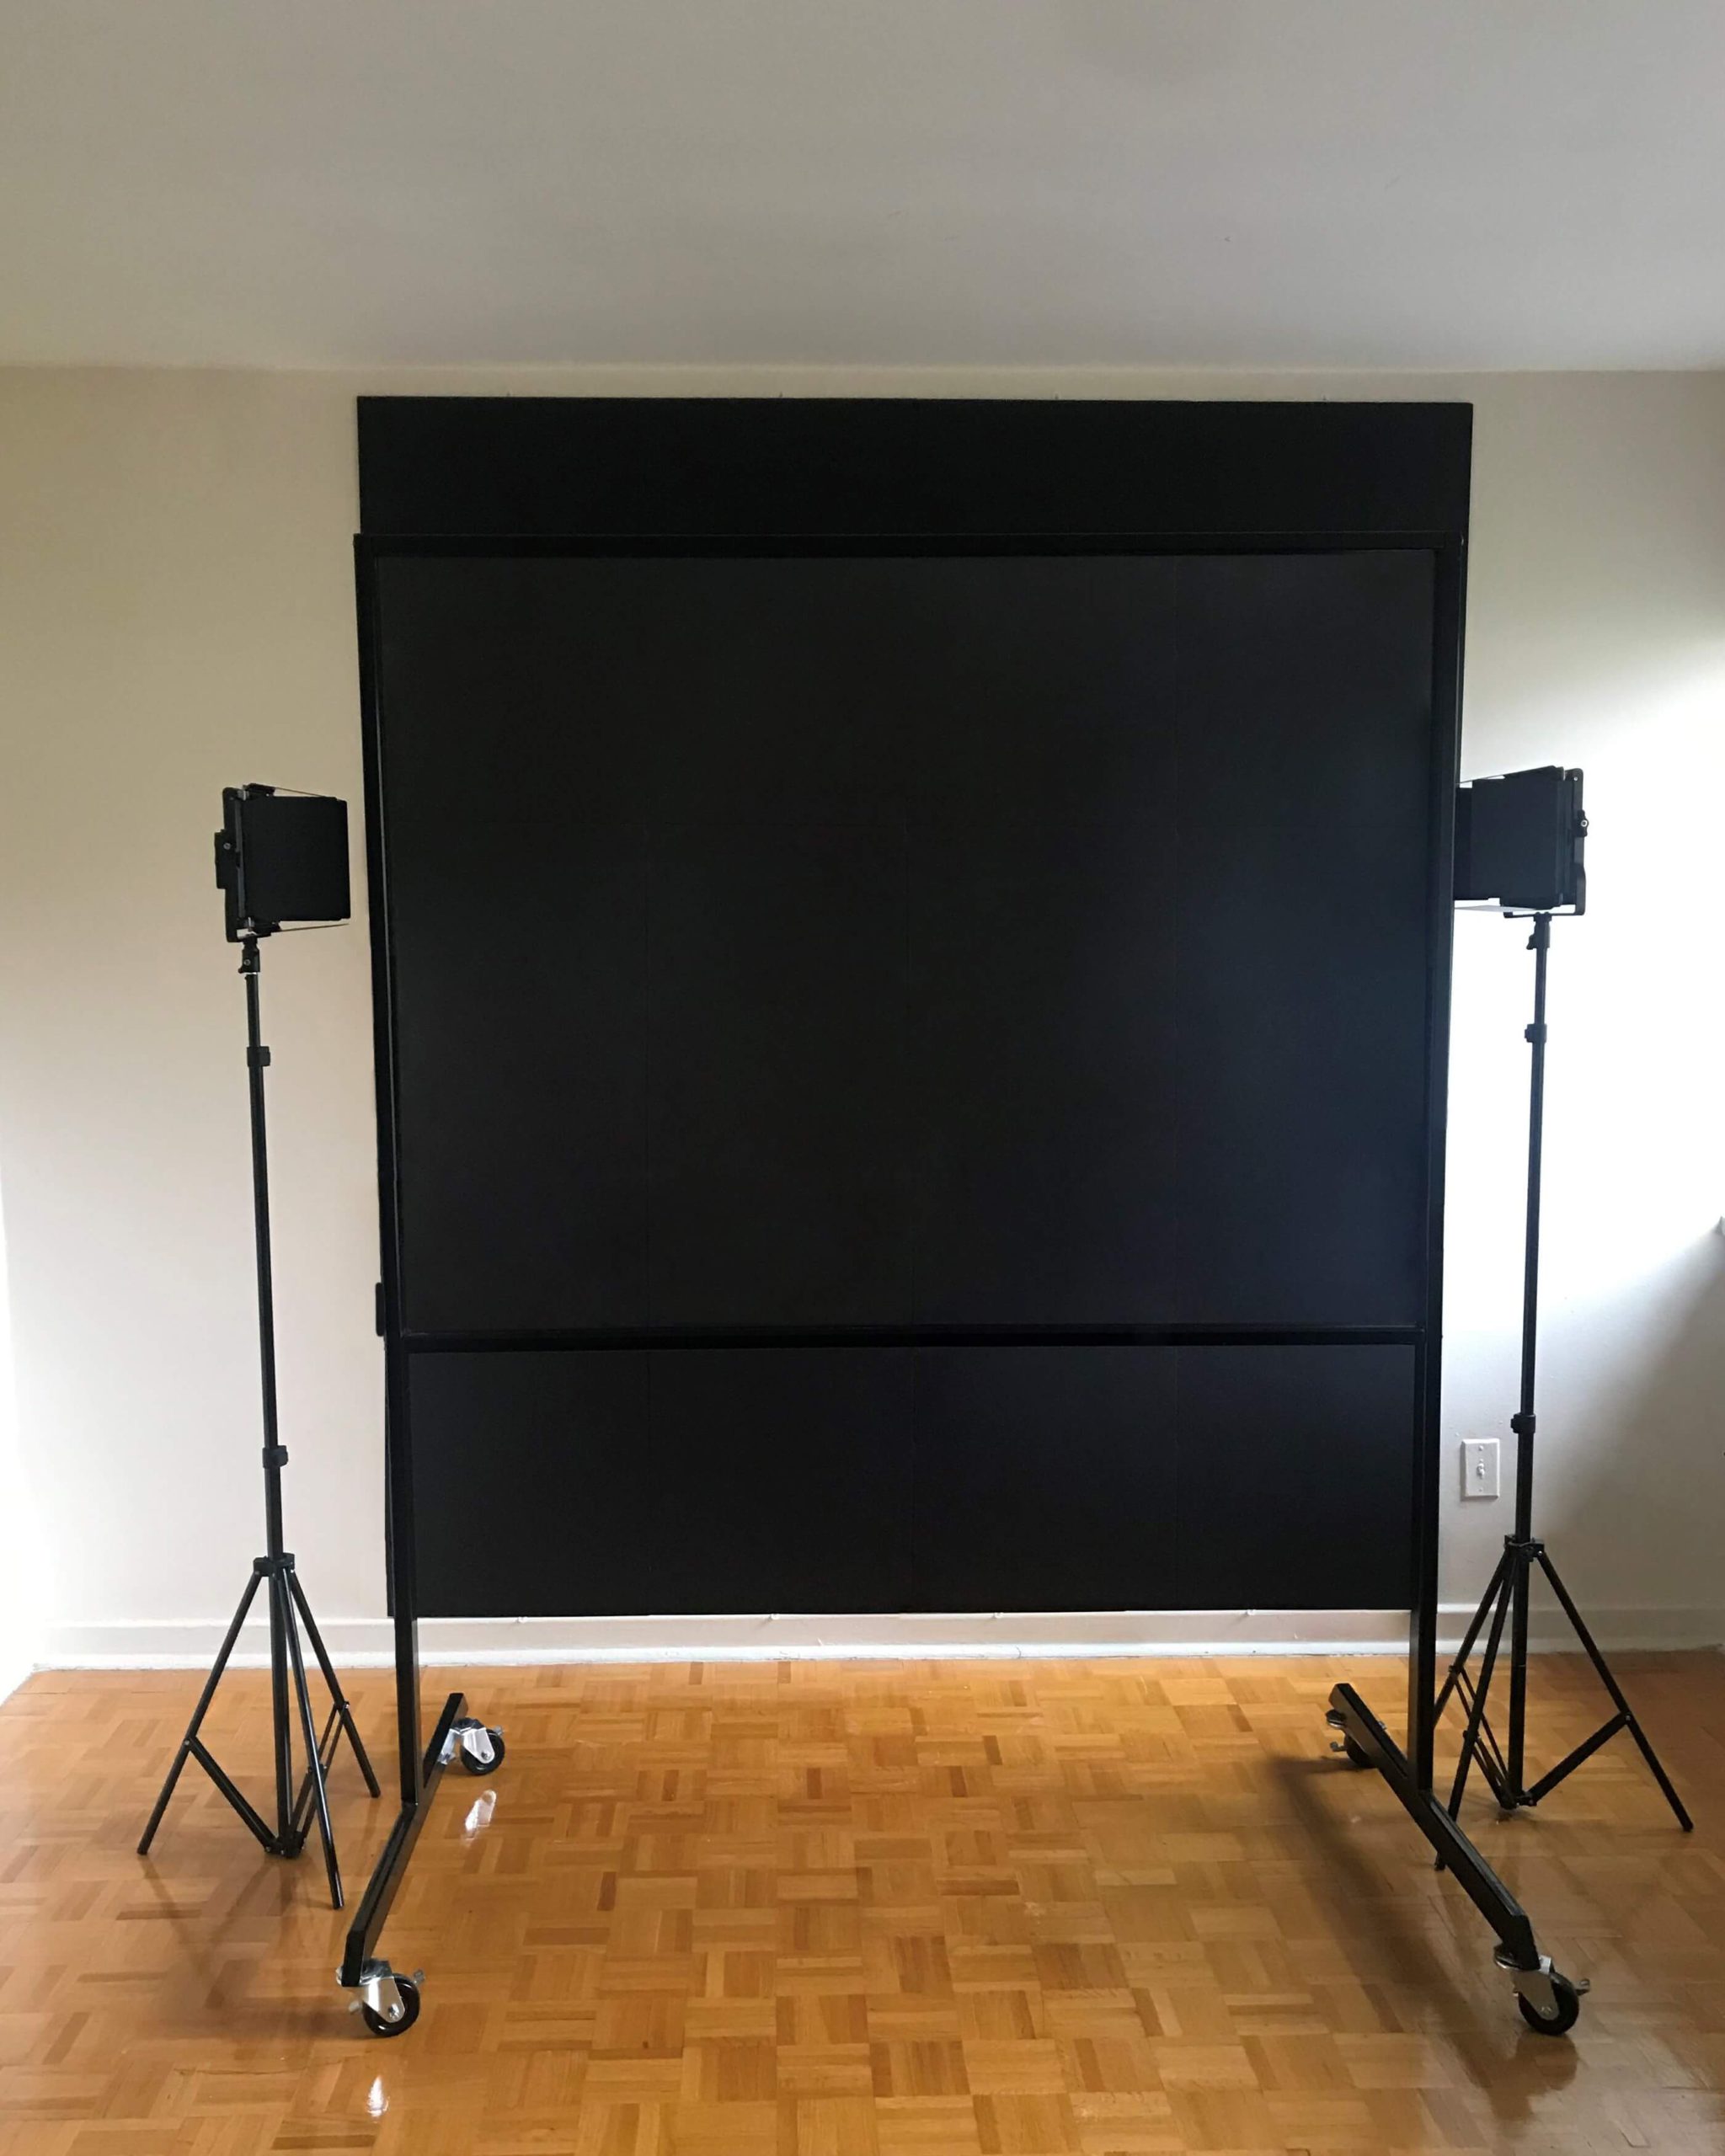 Lightboard studio package large showing lightboard classic product featured in front a black backdrop and two studio lights